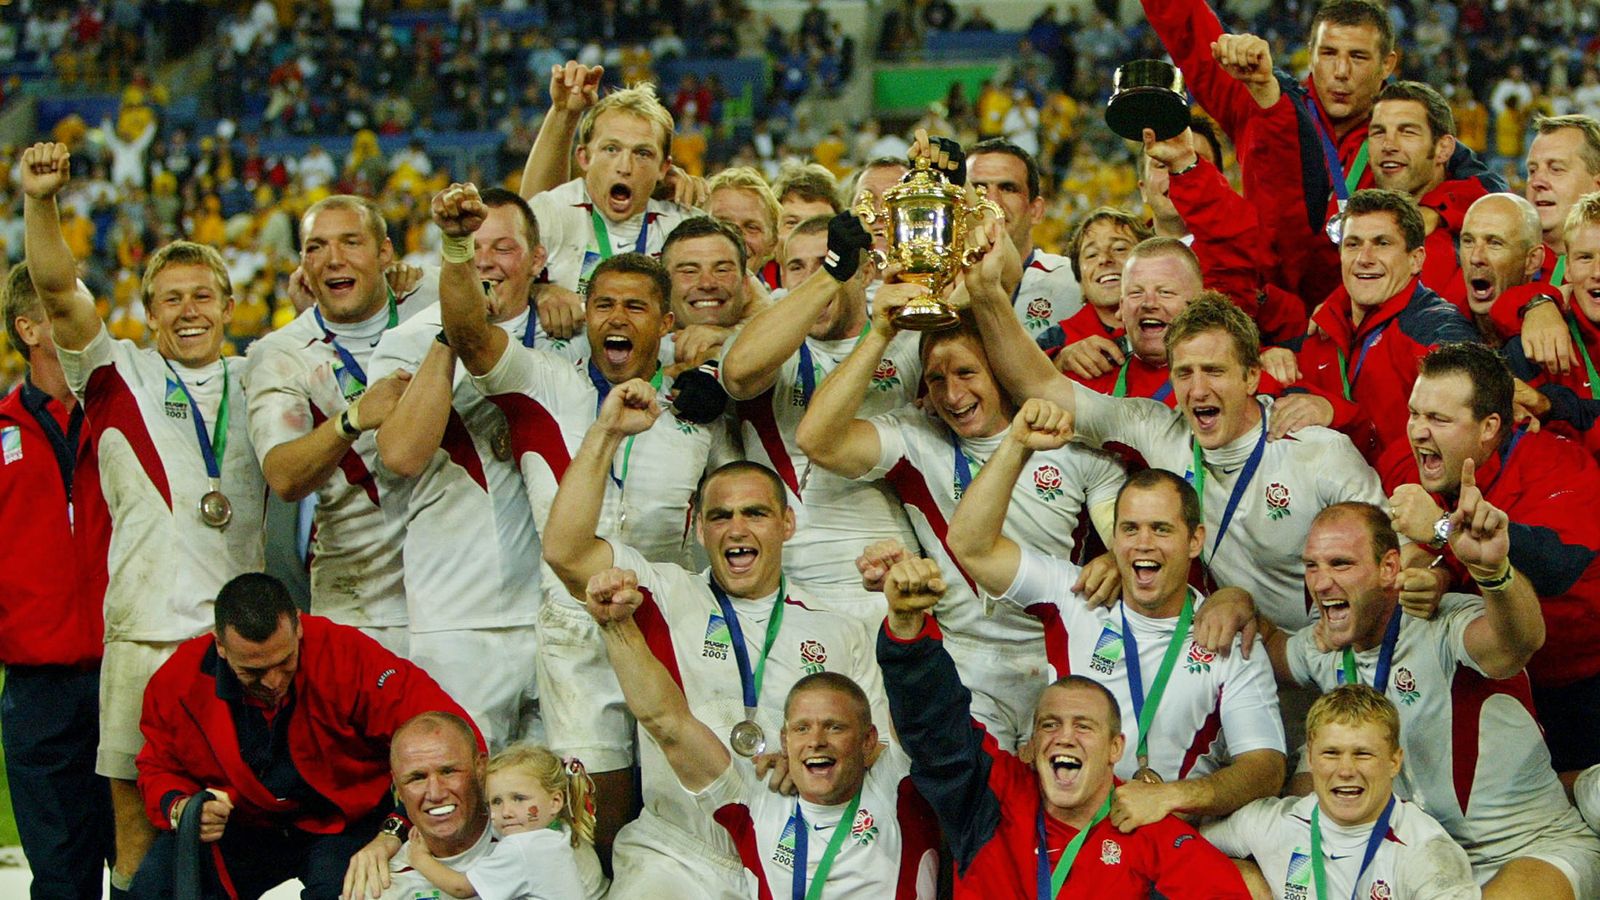 England's Rugby World Cup winners 2003 Where are they now